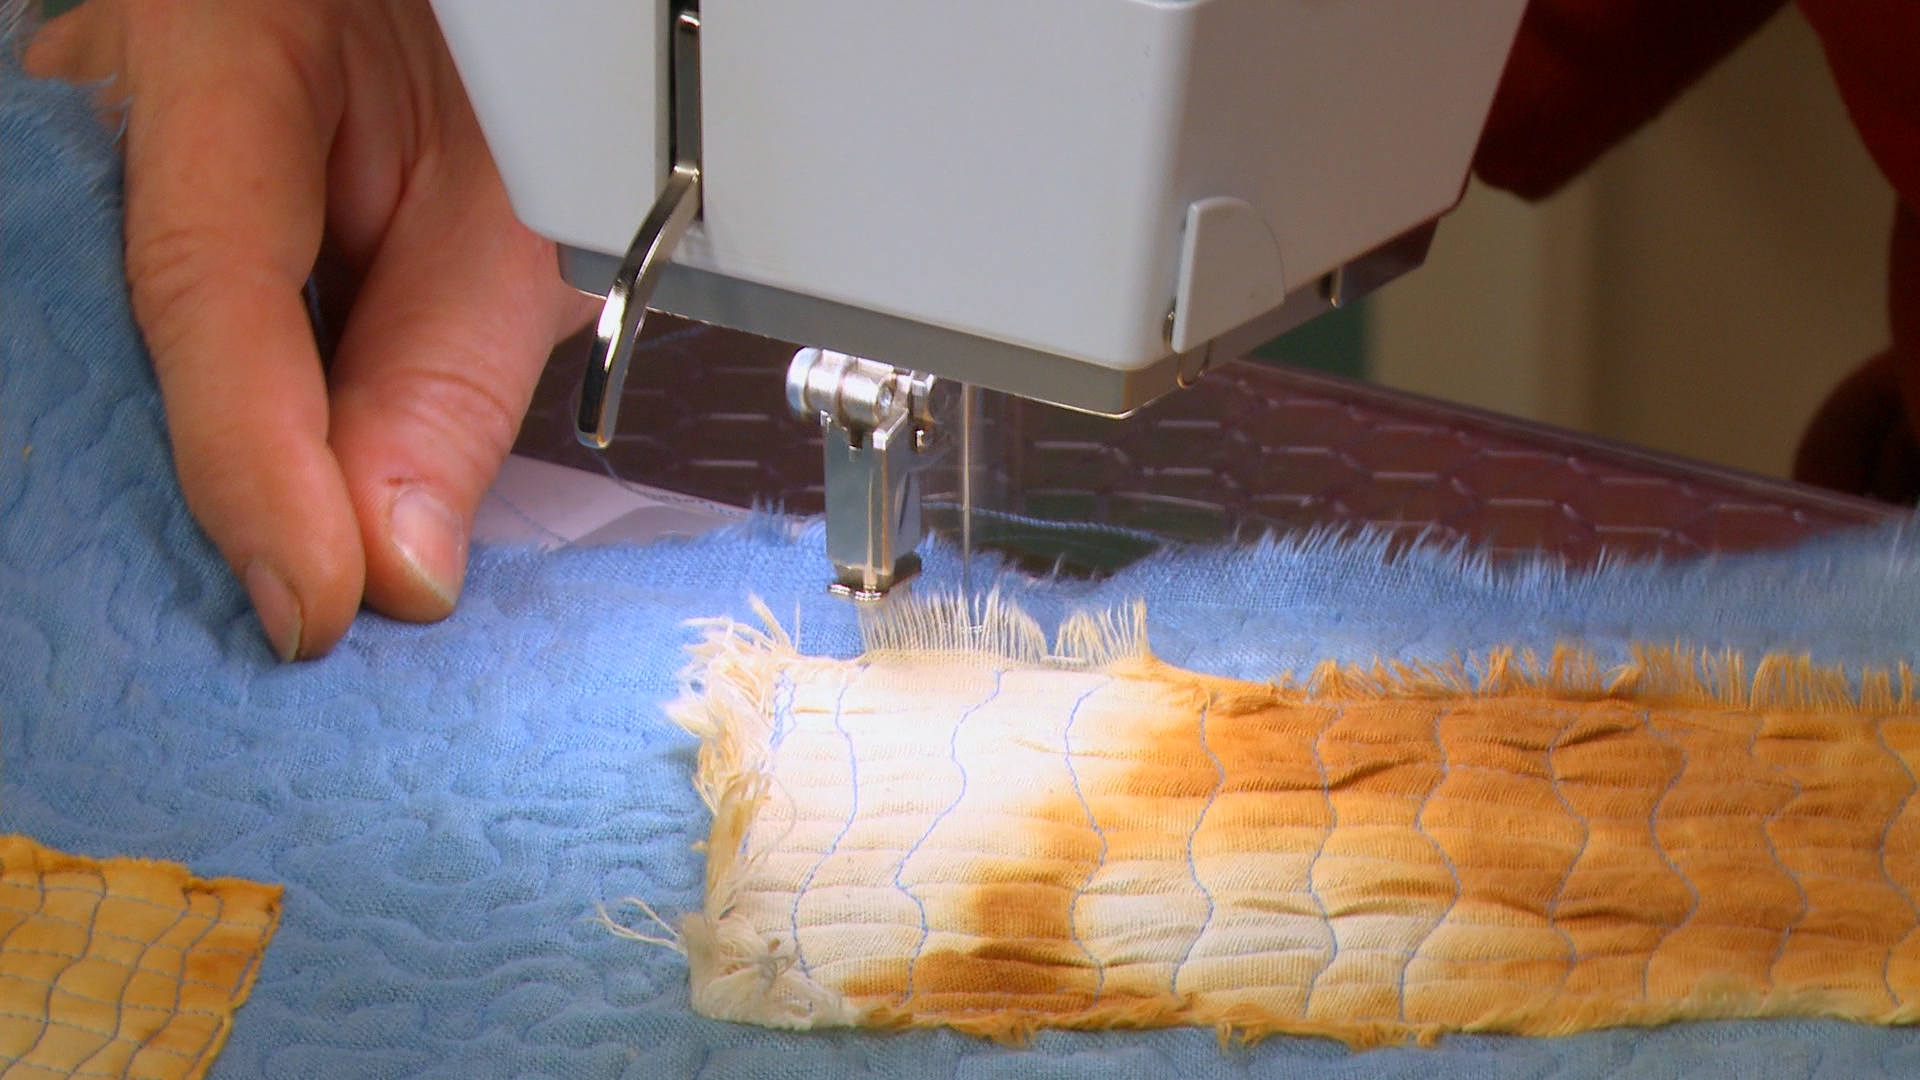 Session 3: Building and Quilting the Substrate